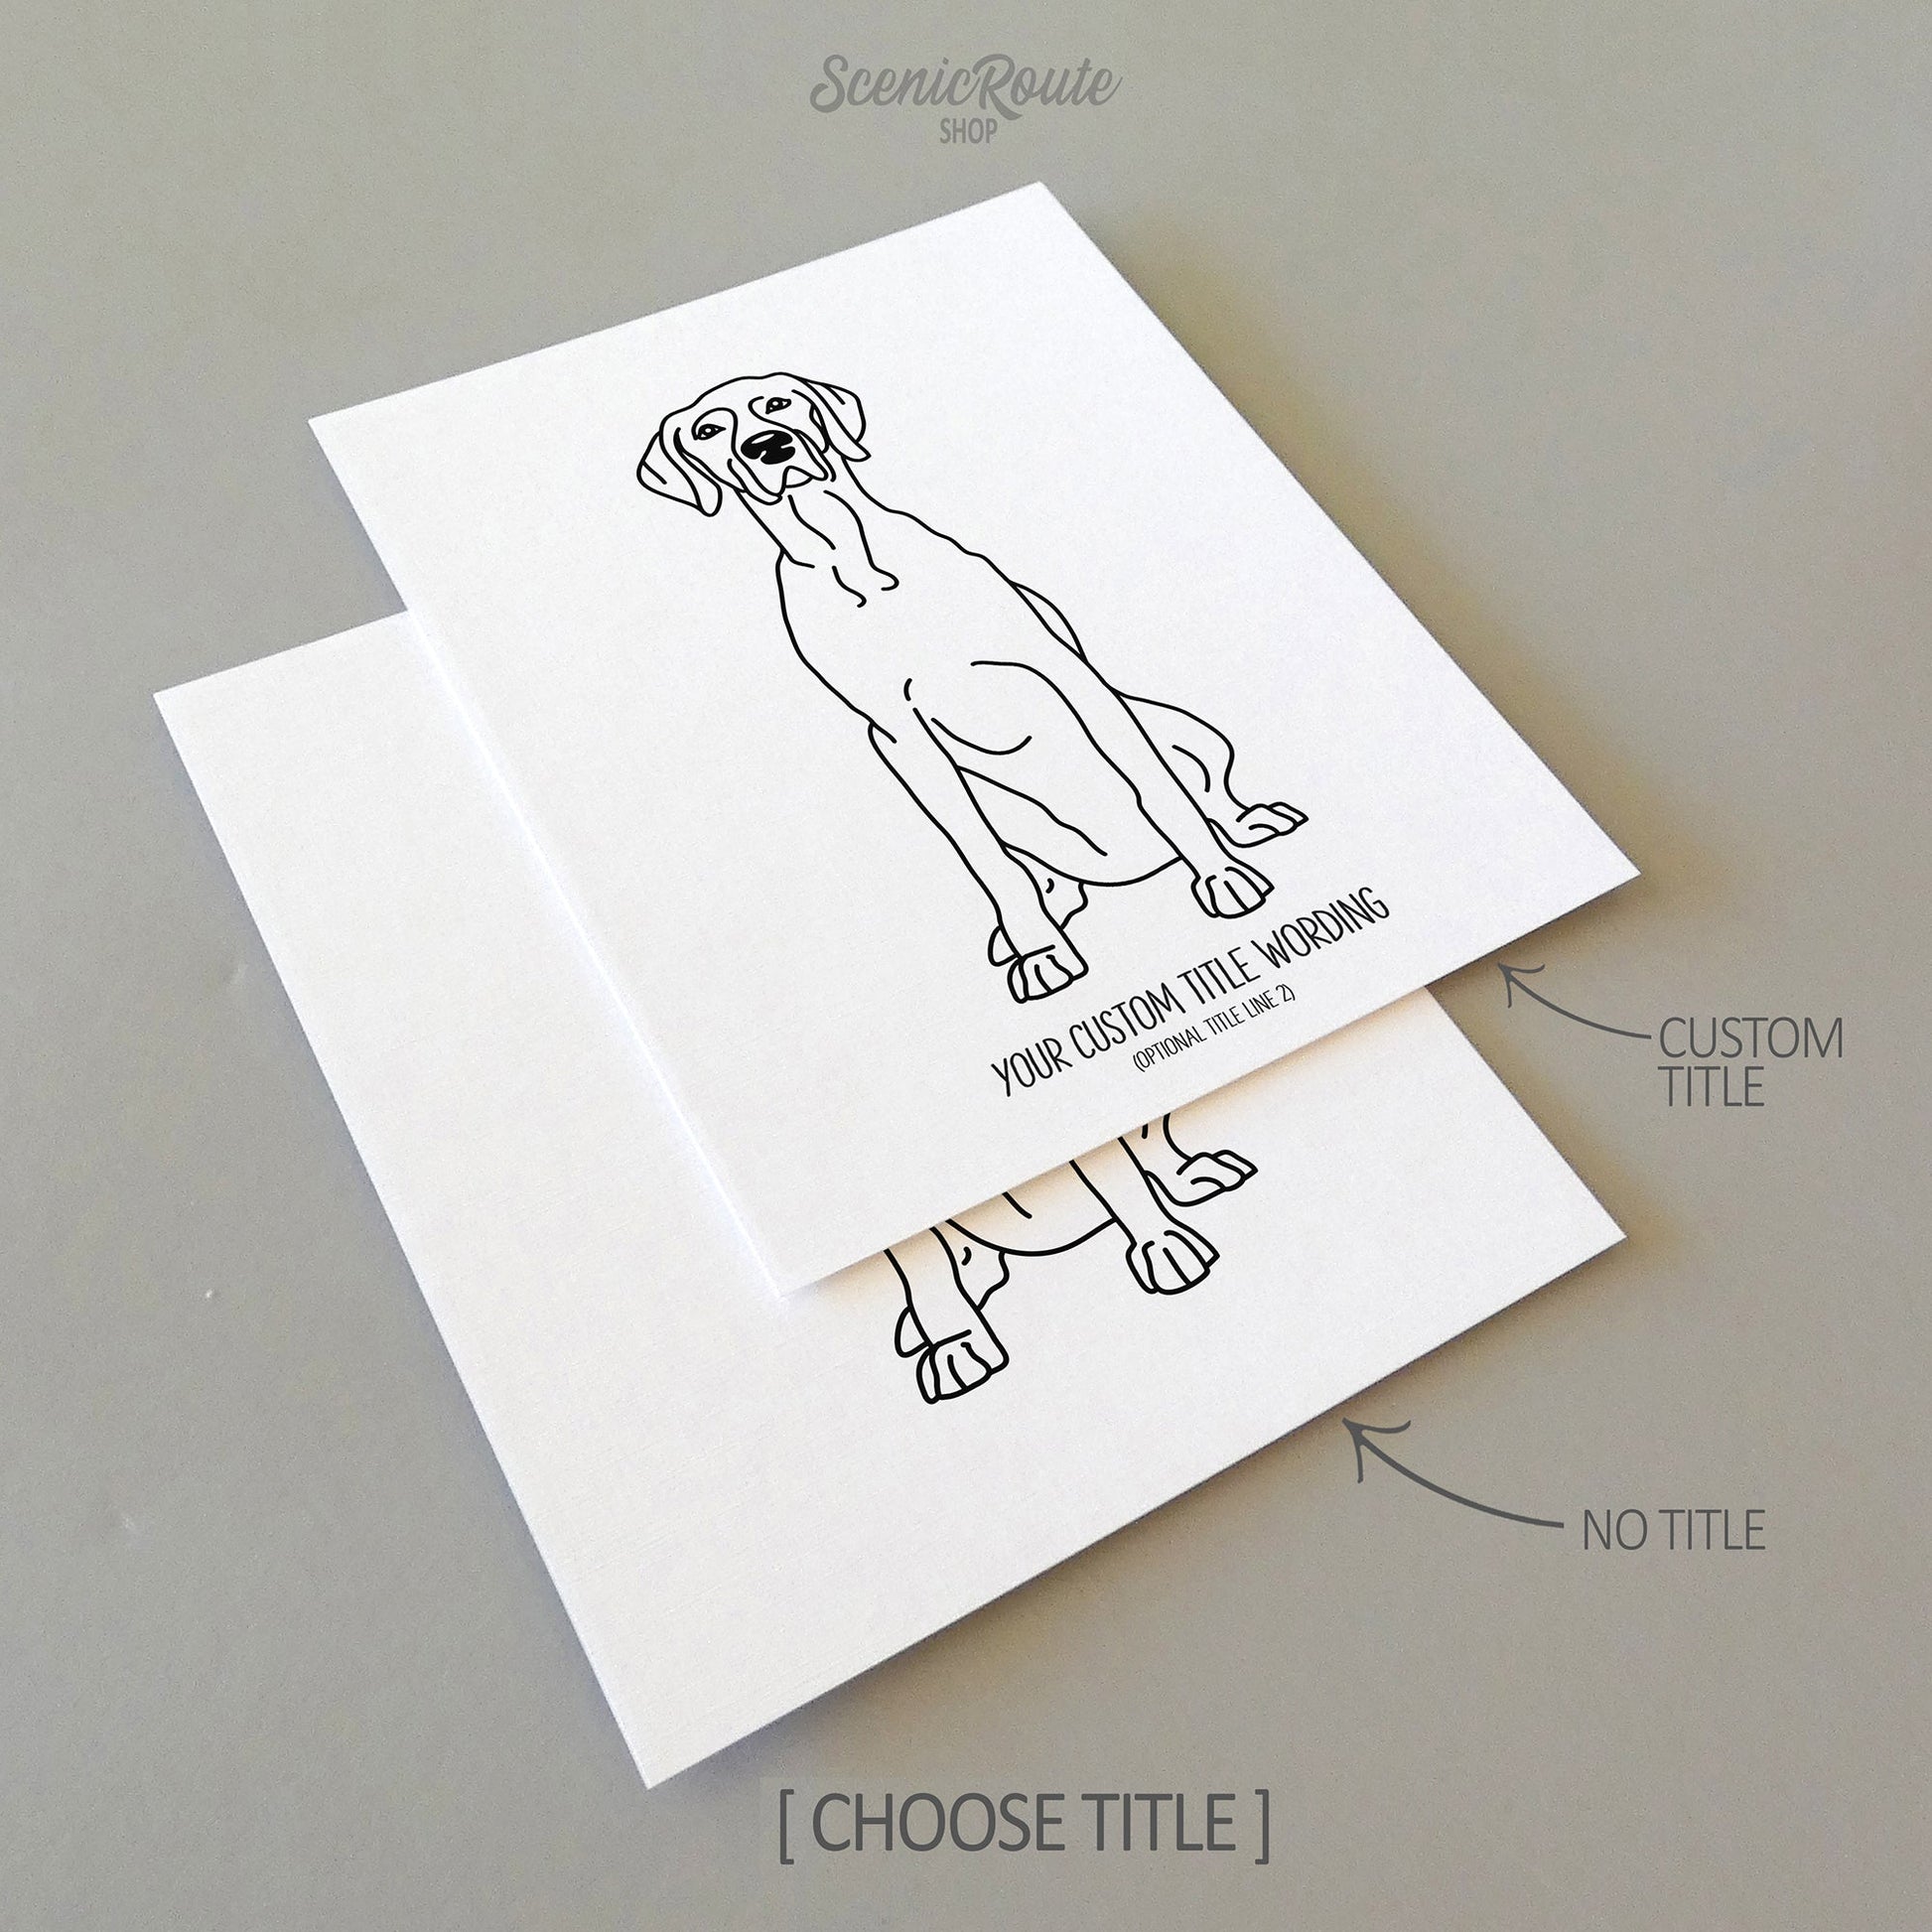 Two line art drawings of a Weimaraner dog on white linen paper with a gray background.  The pieces are shown with “No Title” and “Custom Title” options for the available art print options.